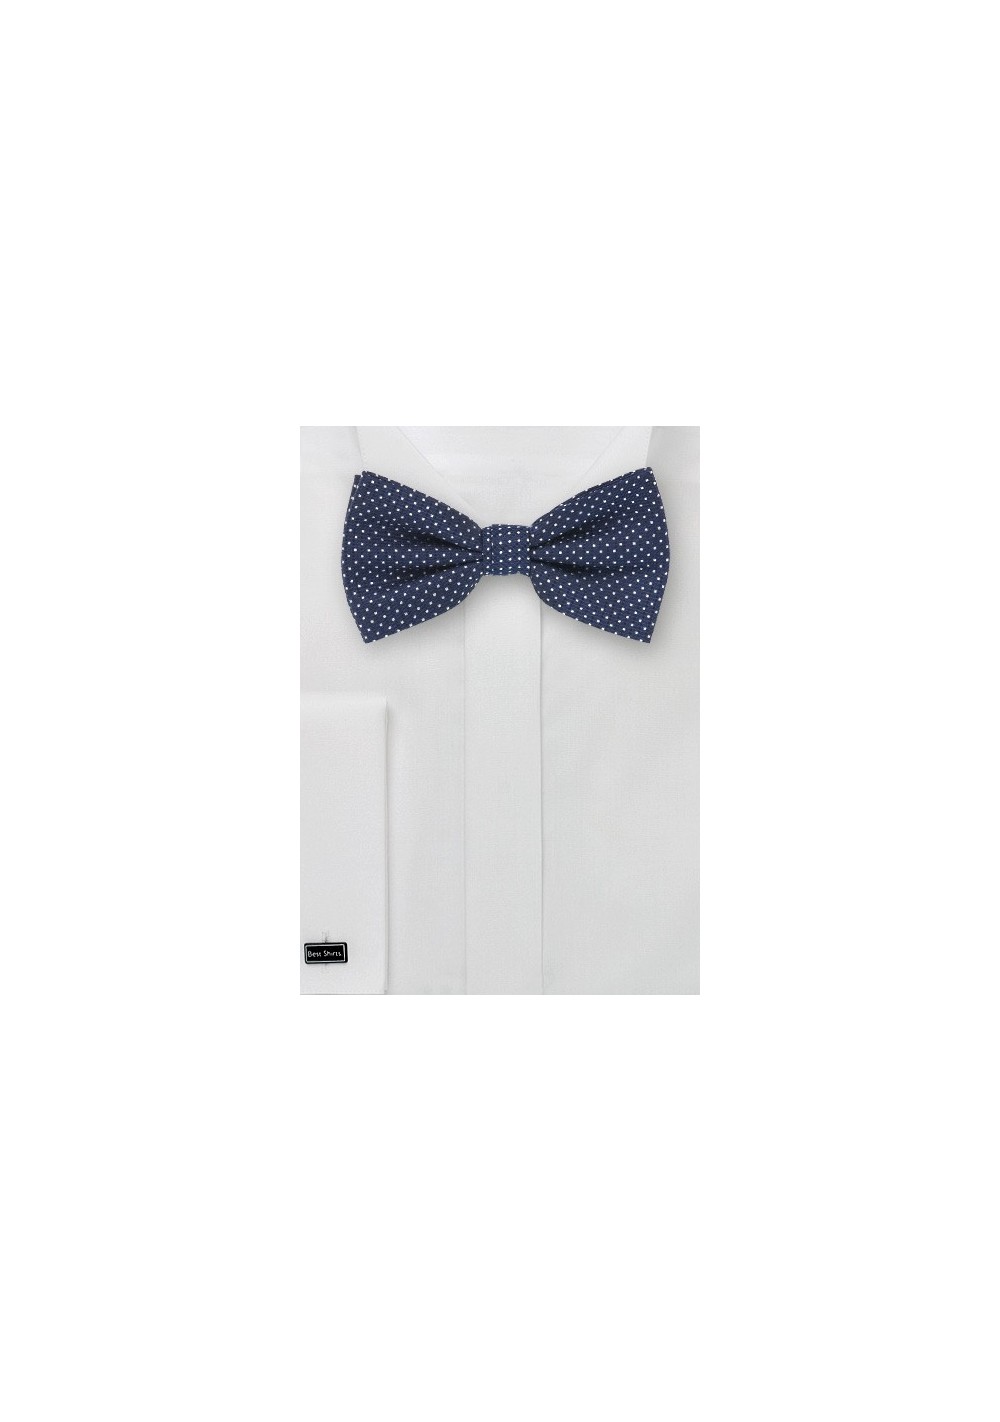 Blue Bow Ties - Bow Tie & Matching Pocket Square